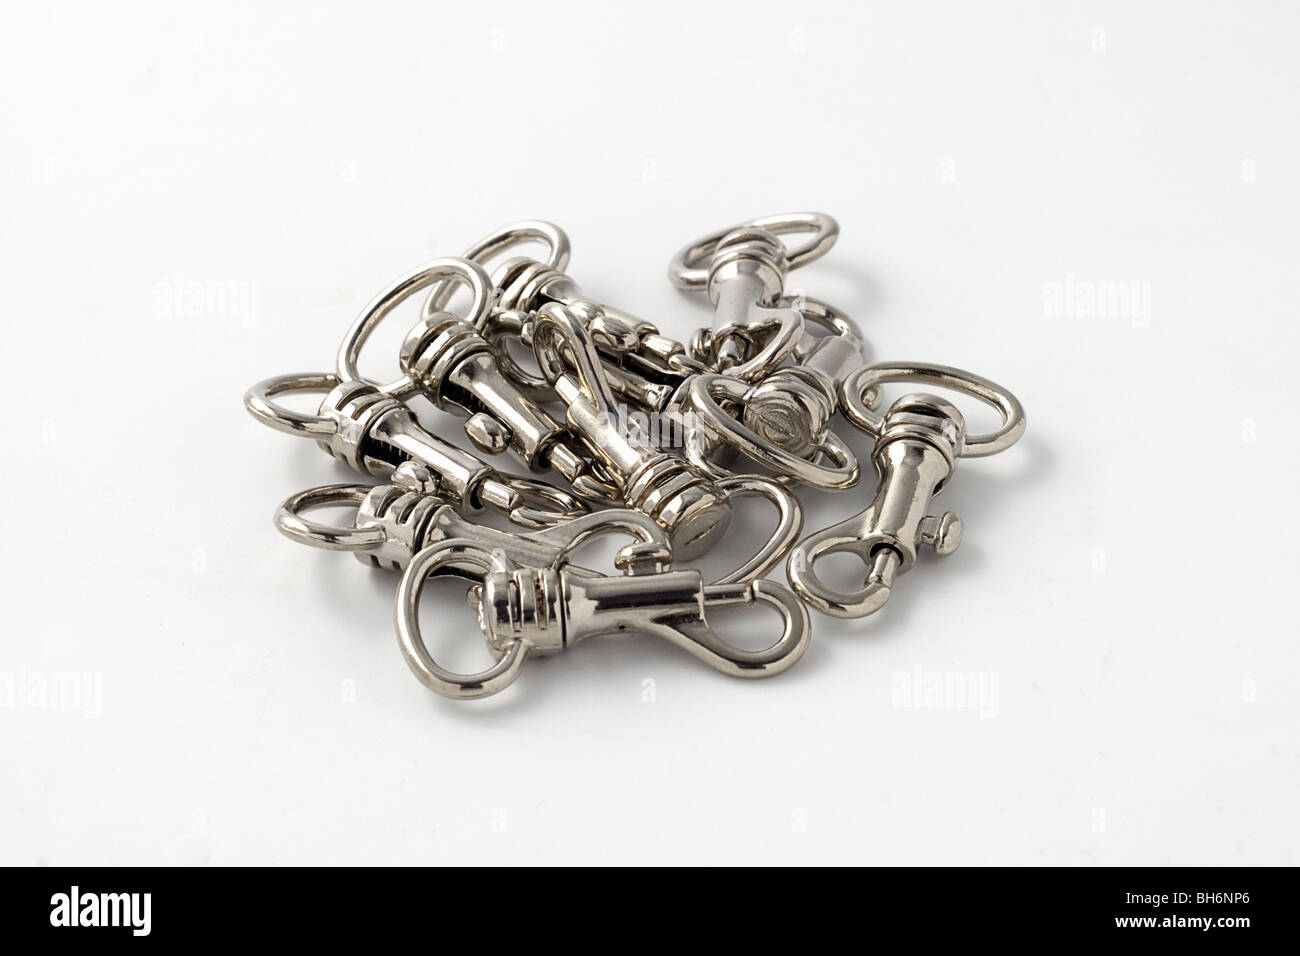 Small Nickel plated swivel hooks isolated against white Stock Photo